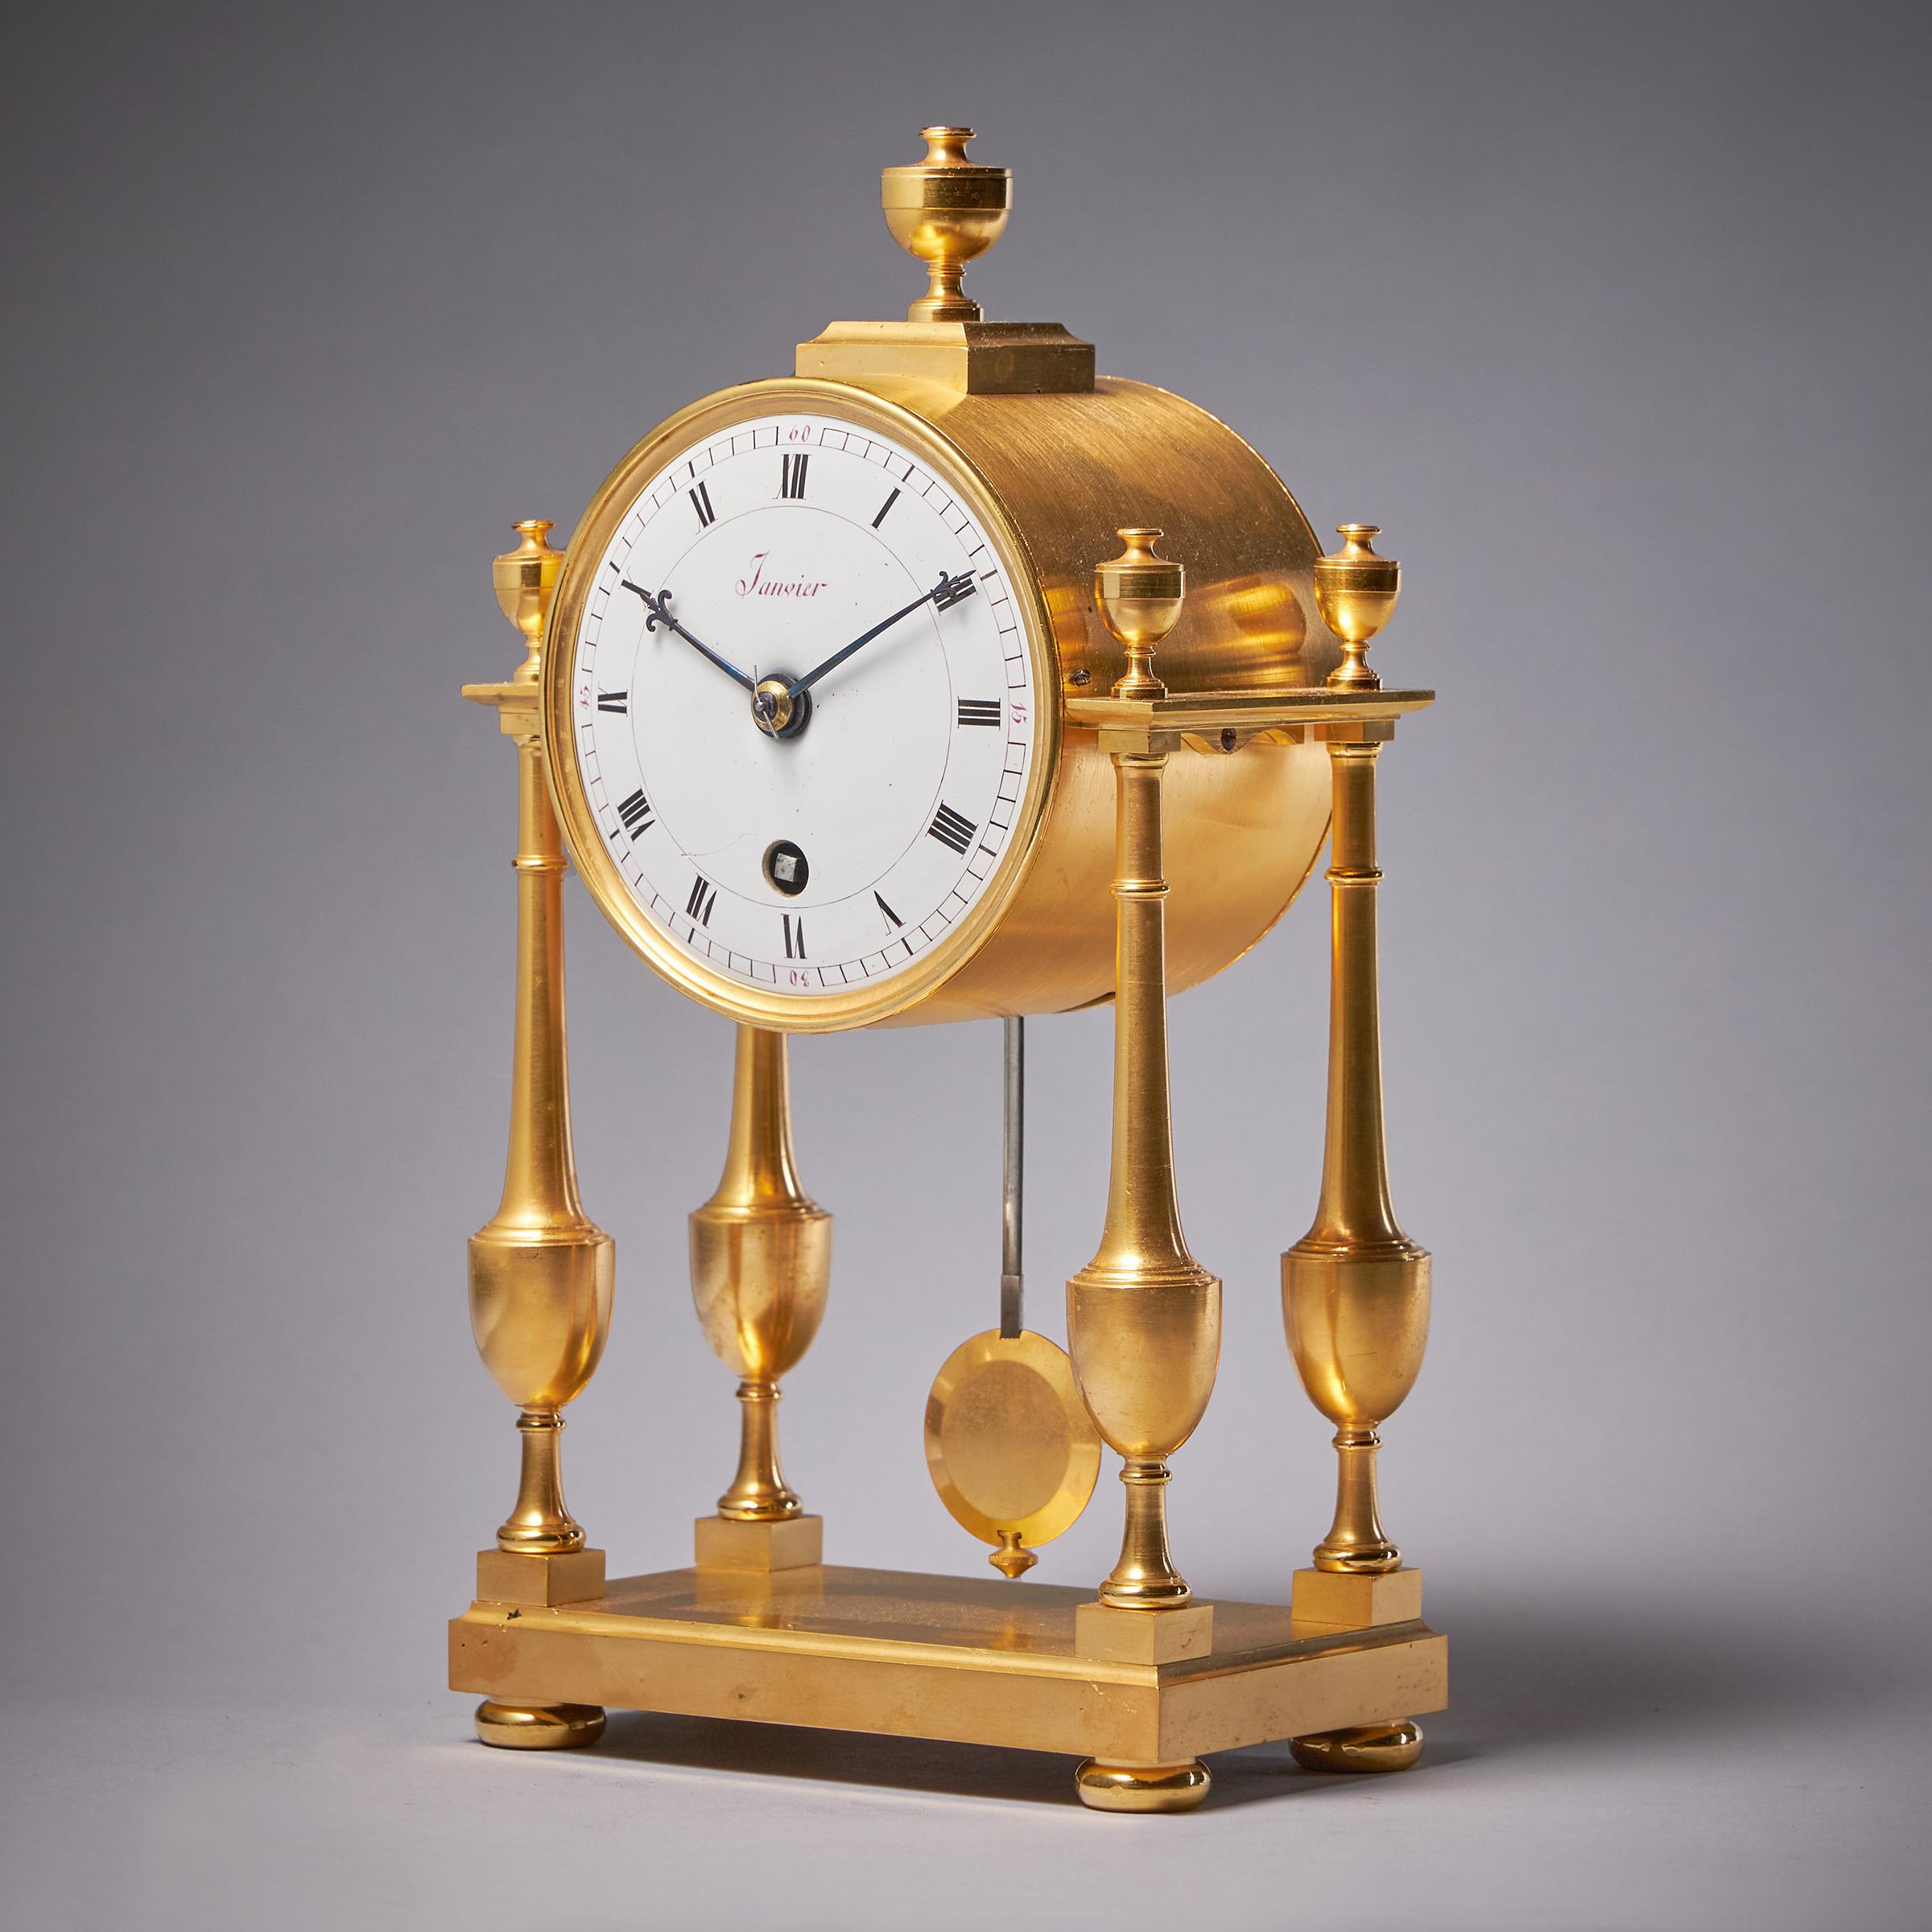 Neoclassical Small Proportioned Elegant Portico Mantel Clock by Janvier, c. 1815